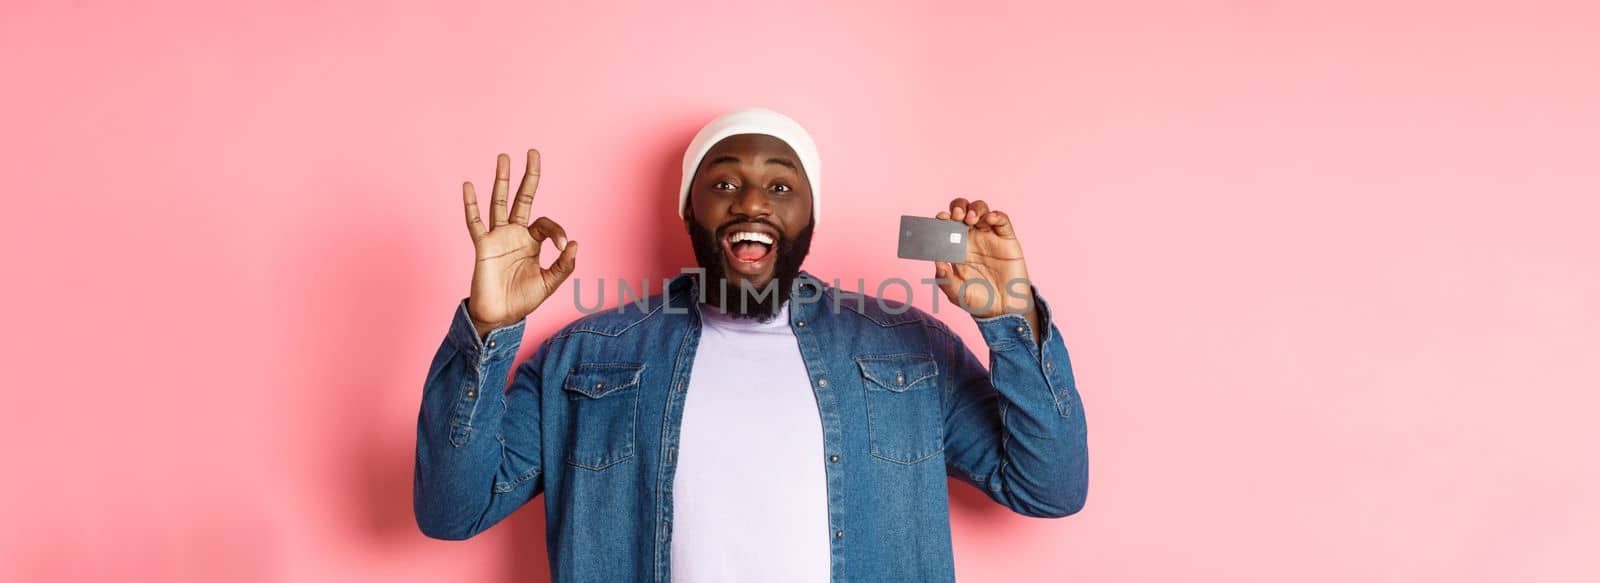 Shopping concept. Handsome african-american man recommending bank, showing credit card and okay sign, smiling satisfied, standing over pink background.